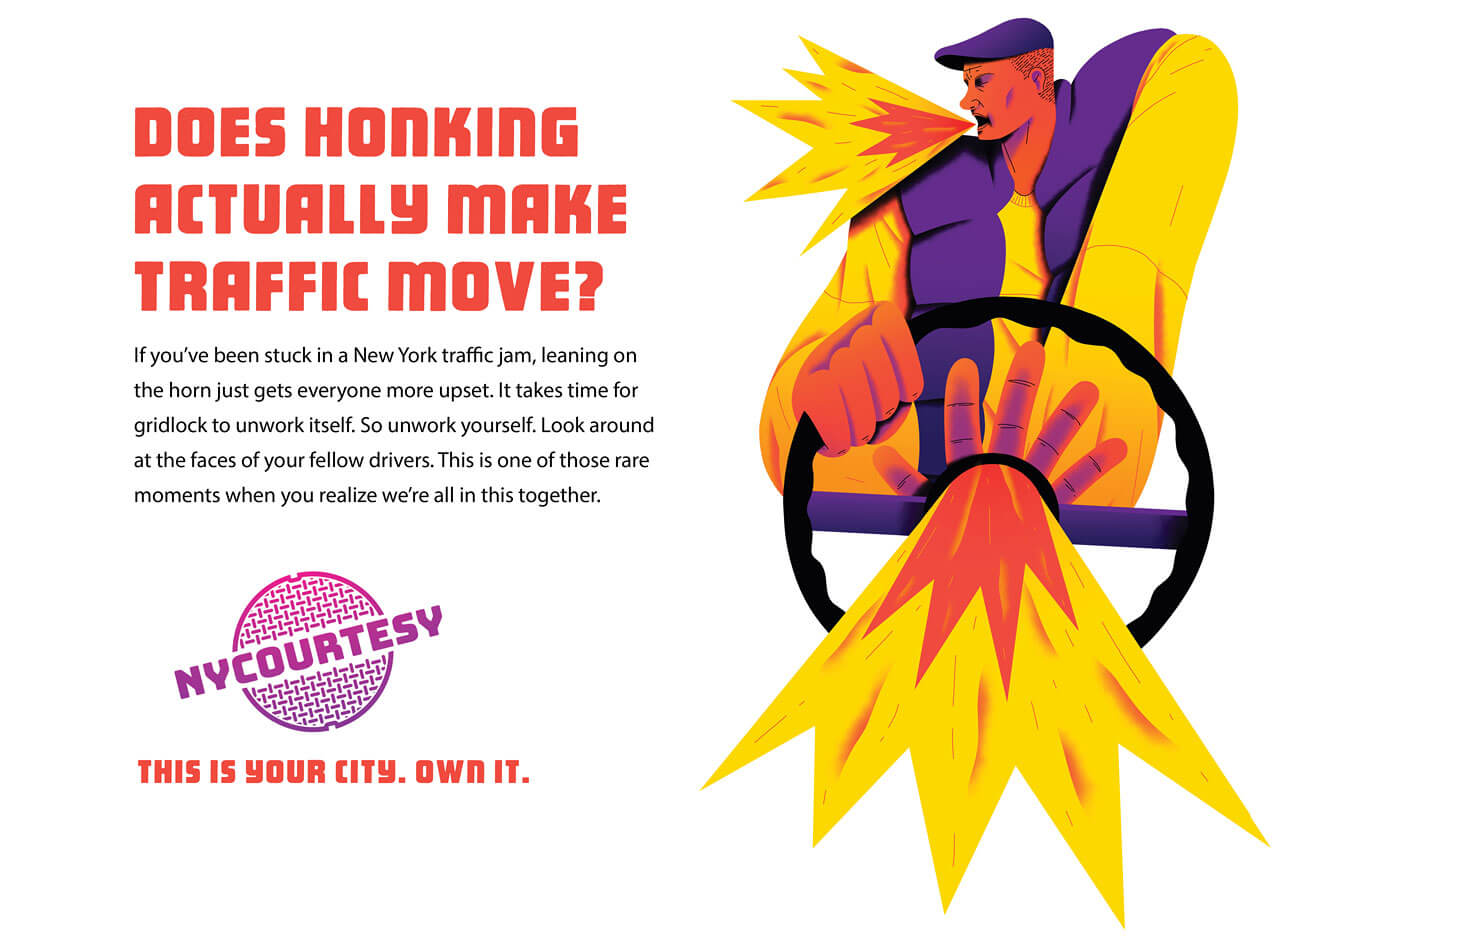 New York Courtesy. Does honking actually make traffic move?